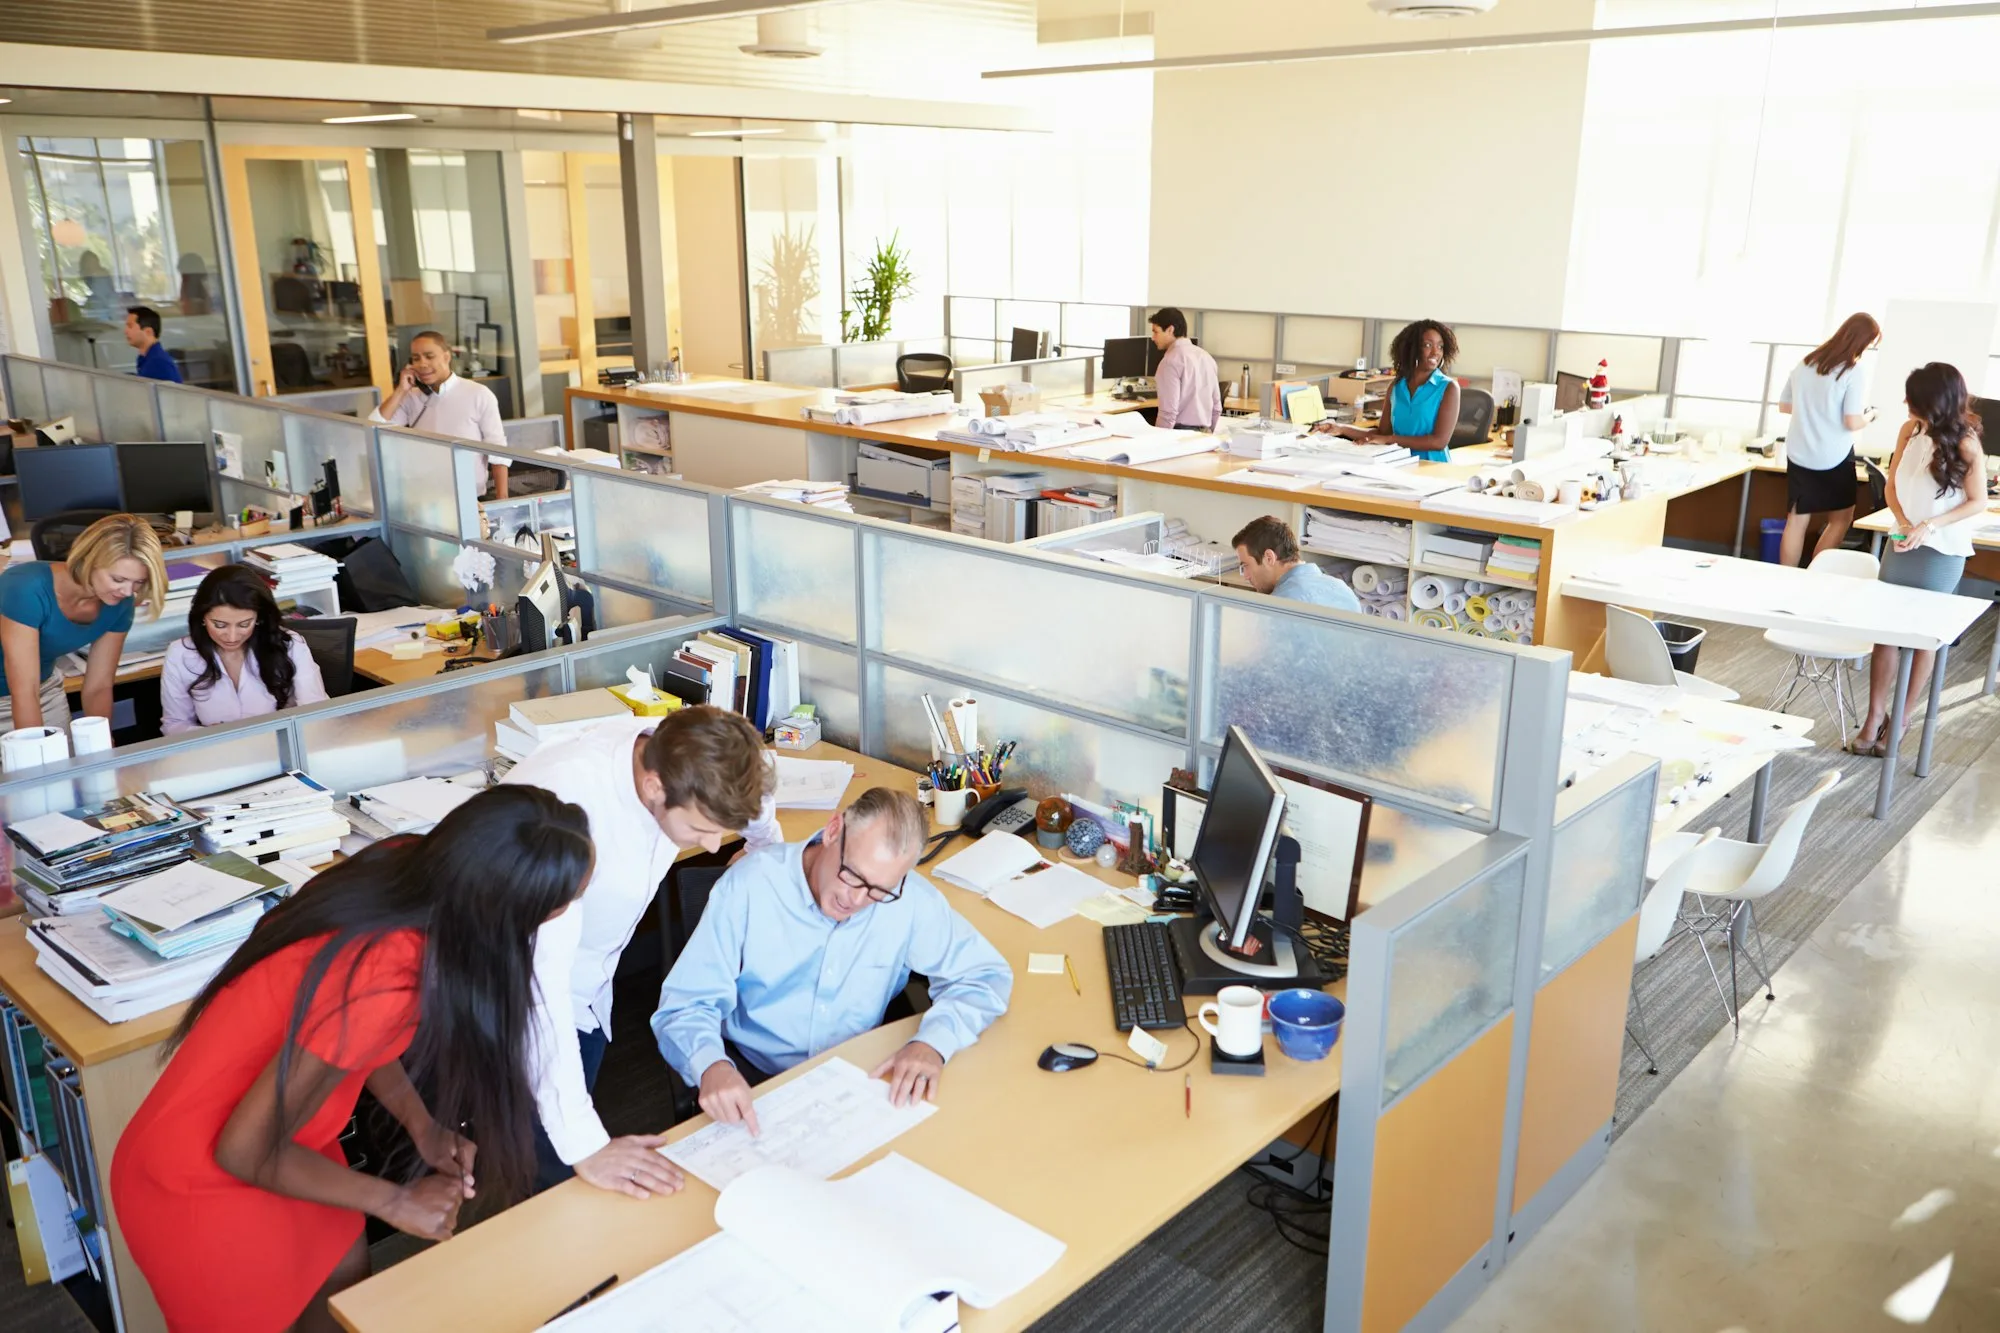 How Introverts can Thrive in Open Office Environments